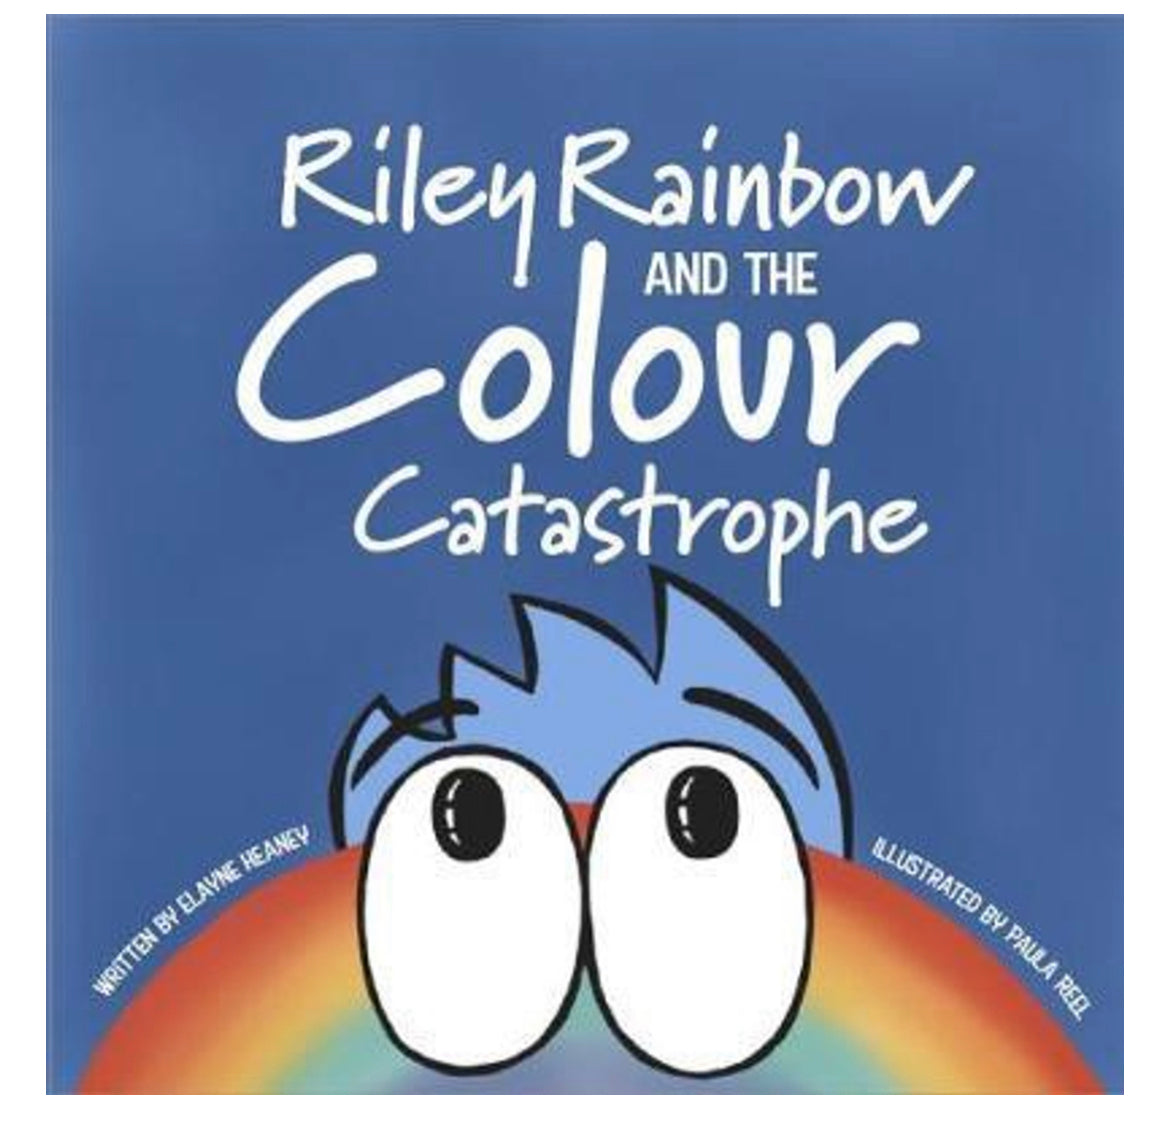 Riley rainbow and the colour catastrophe book